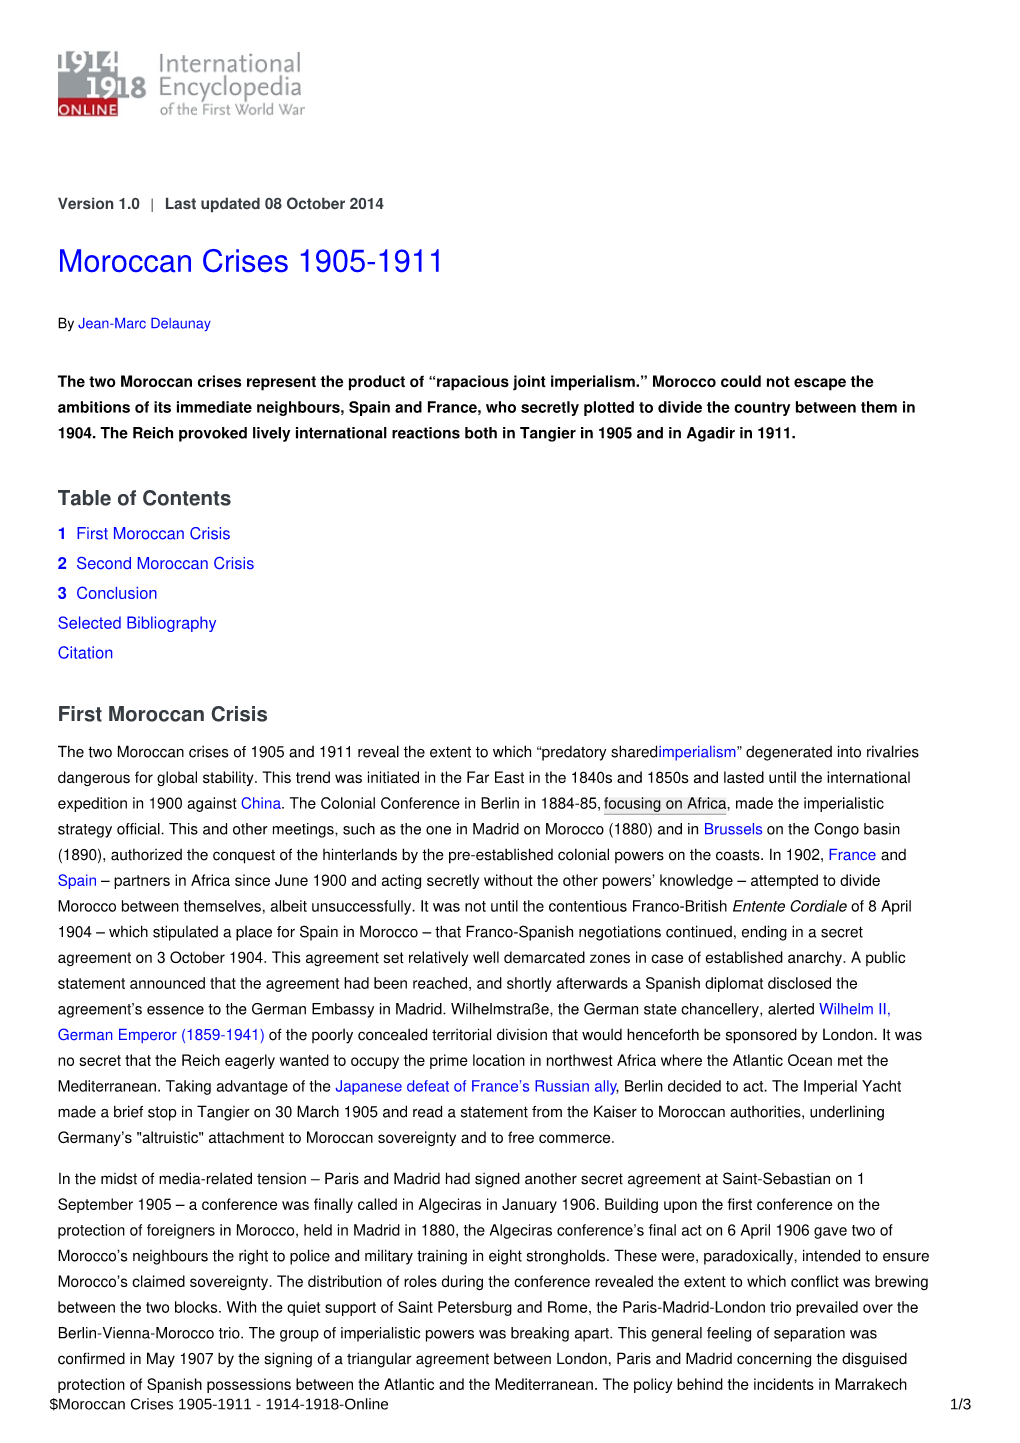 Moroccan Crises 1905-1911 | International Encyclopedia of the First